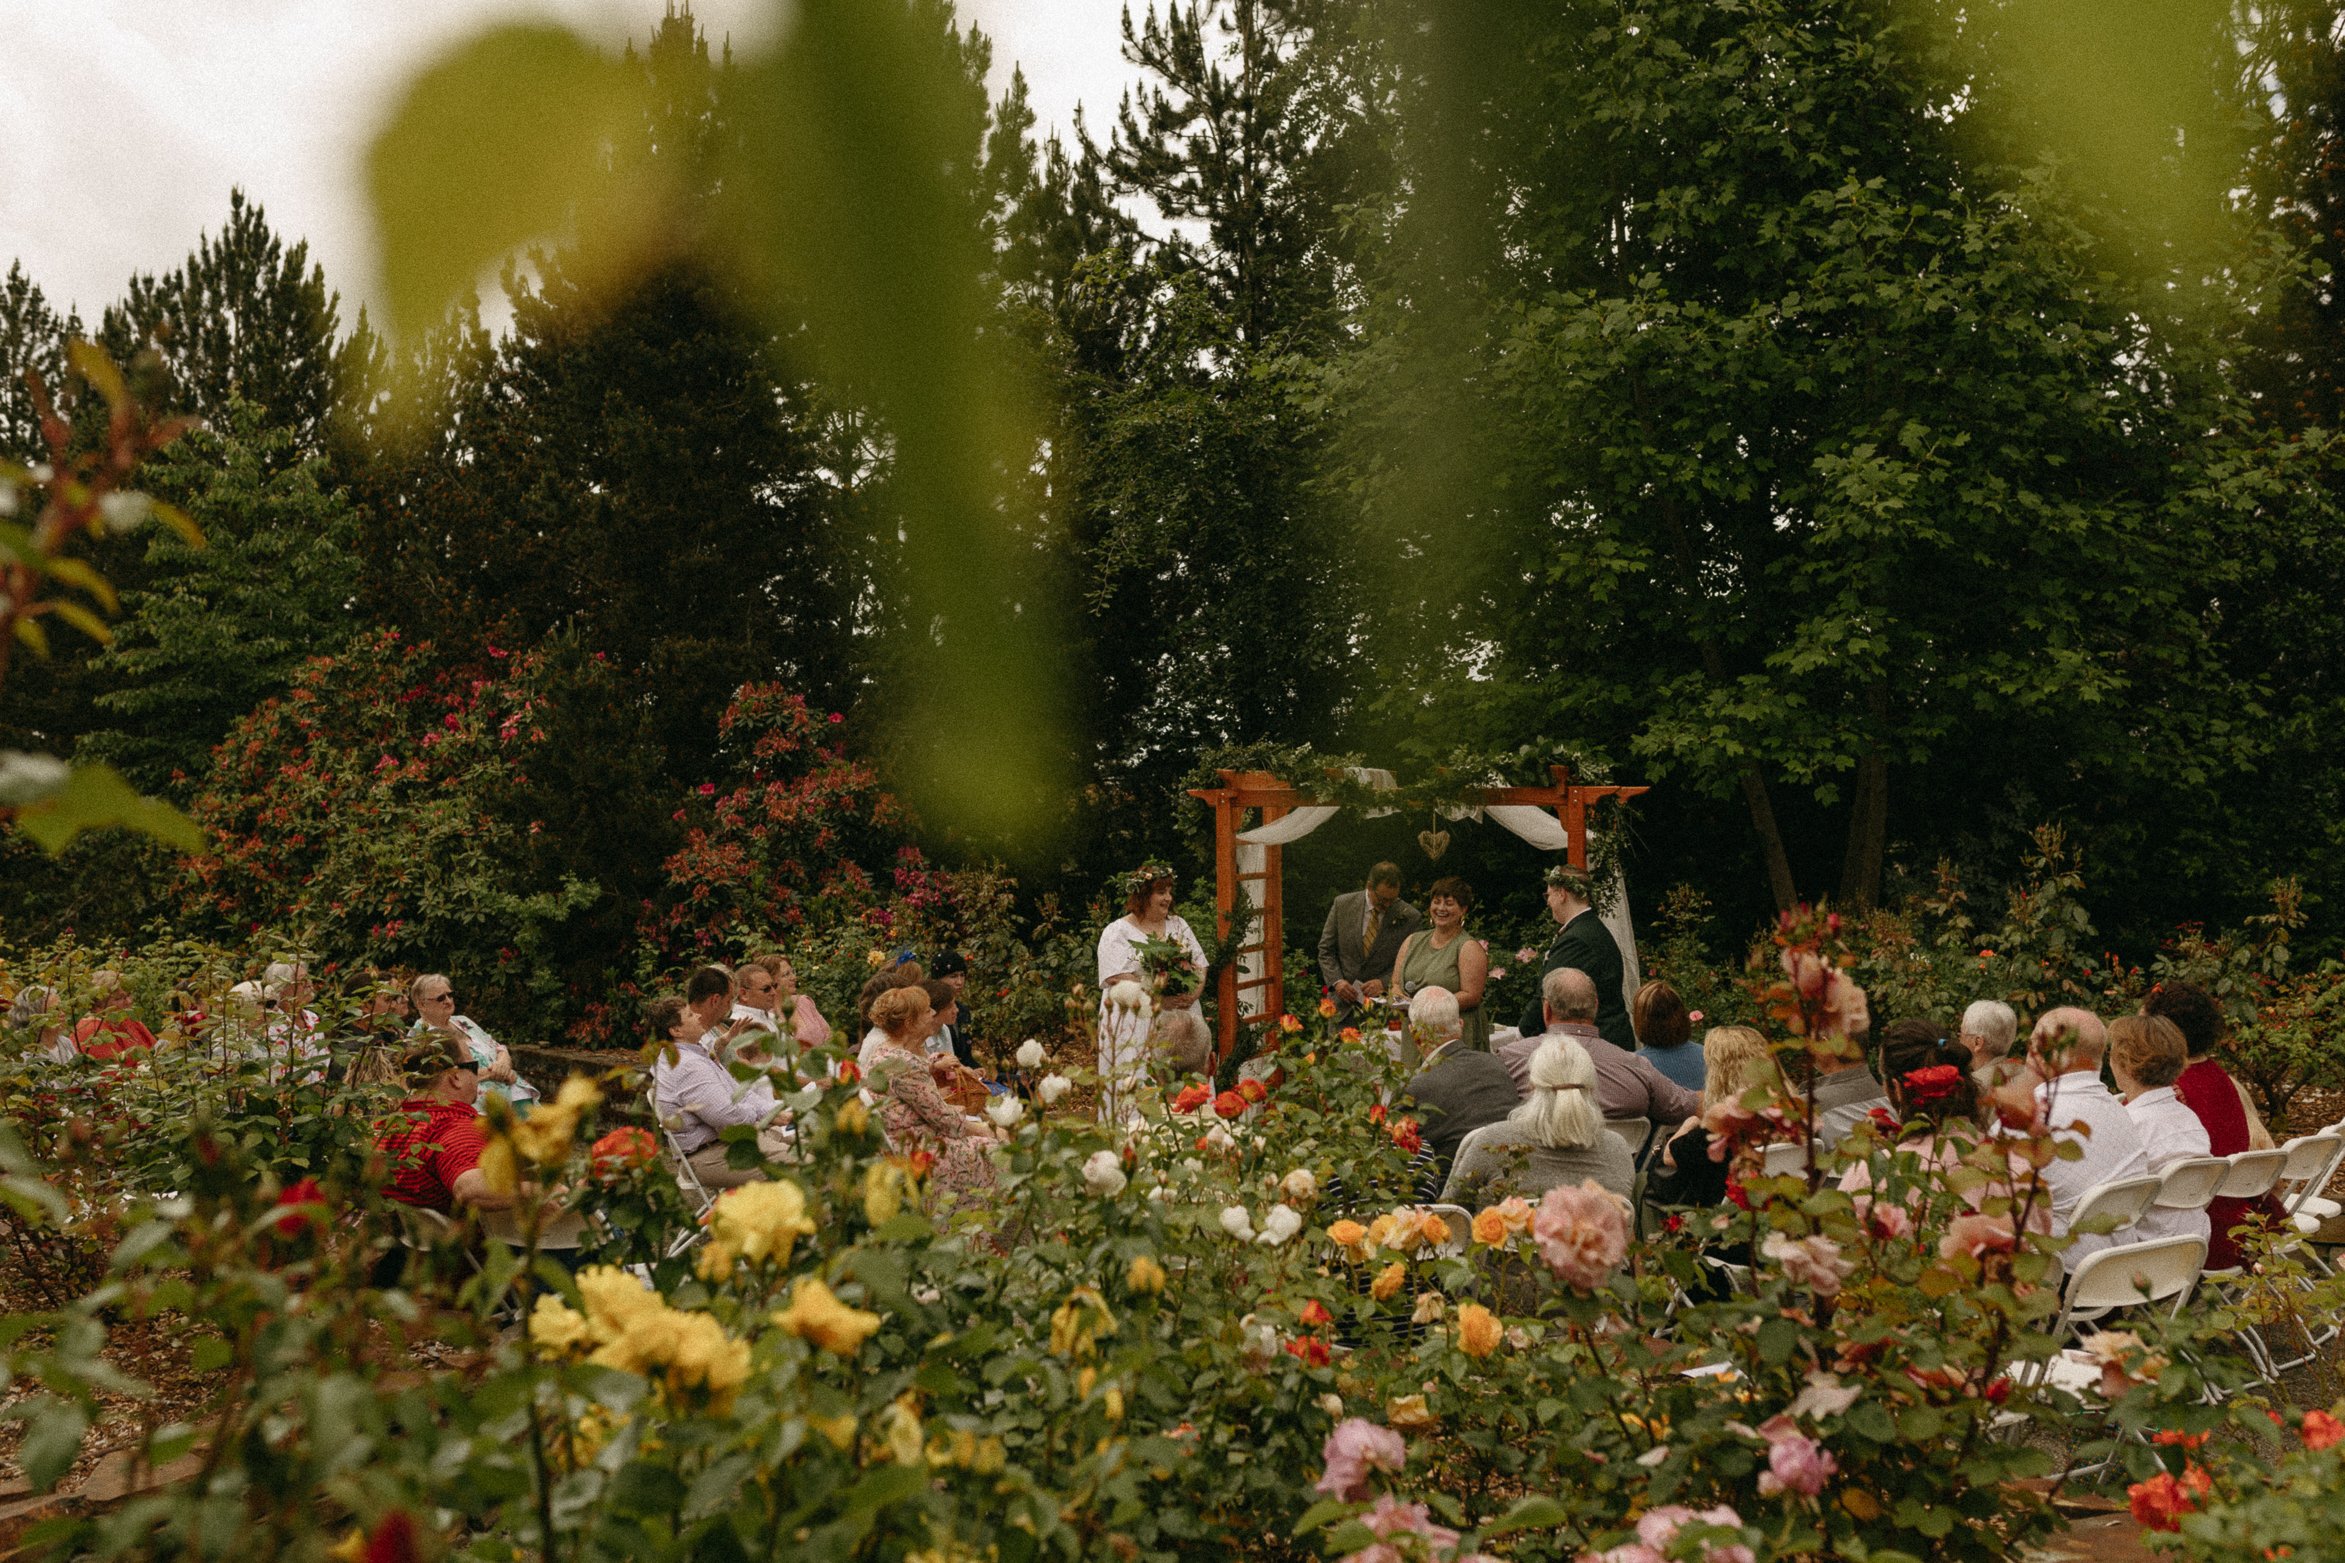 sunsoaked-queer-seattle-washington-arboretum-rose-garden-lqbtq-wedding-by-genderqueer-tacoma-elopement-photographer-halle-roland-photography-11.jpg